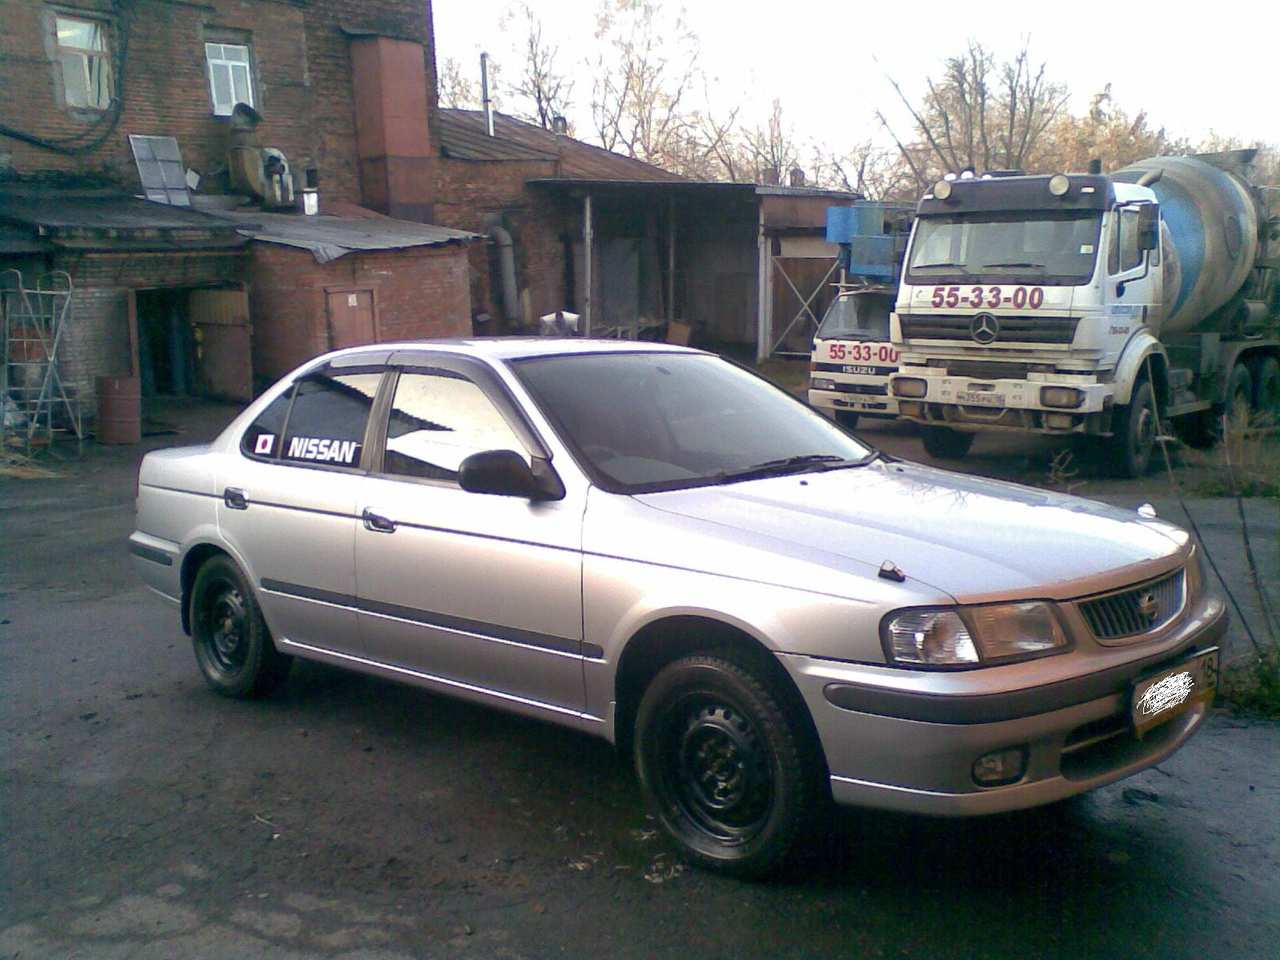 Nissan sunny 2000 model picture #4